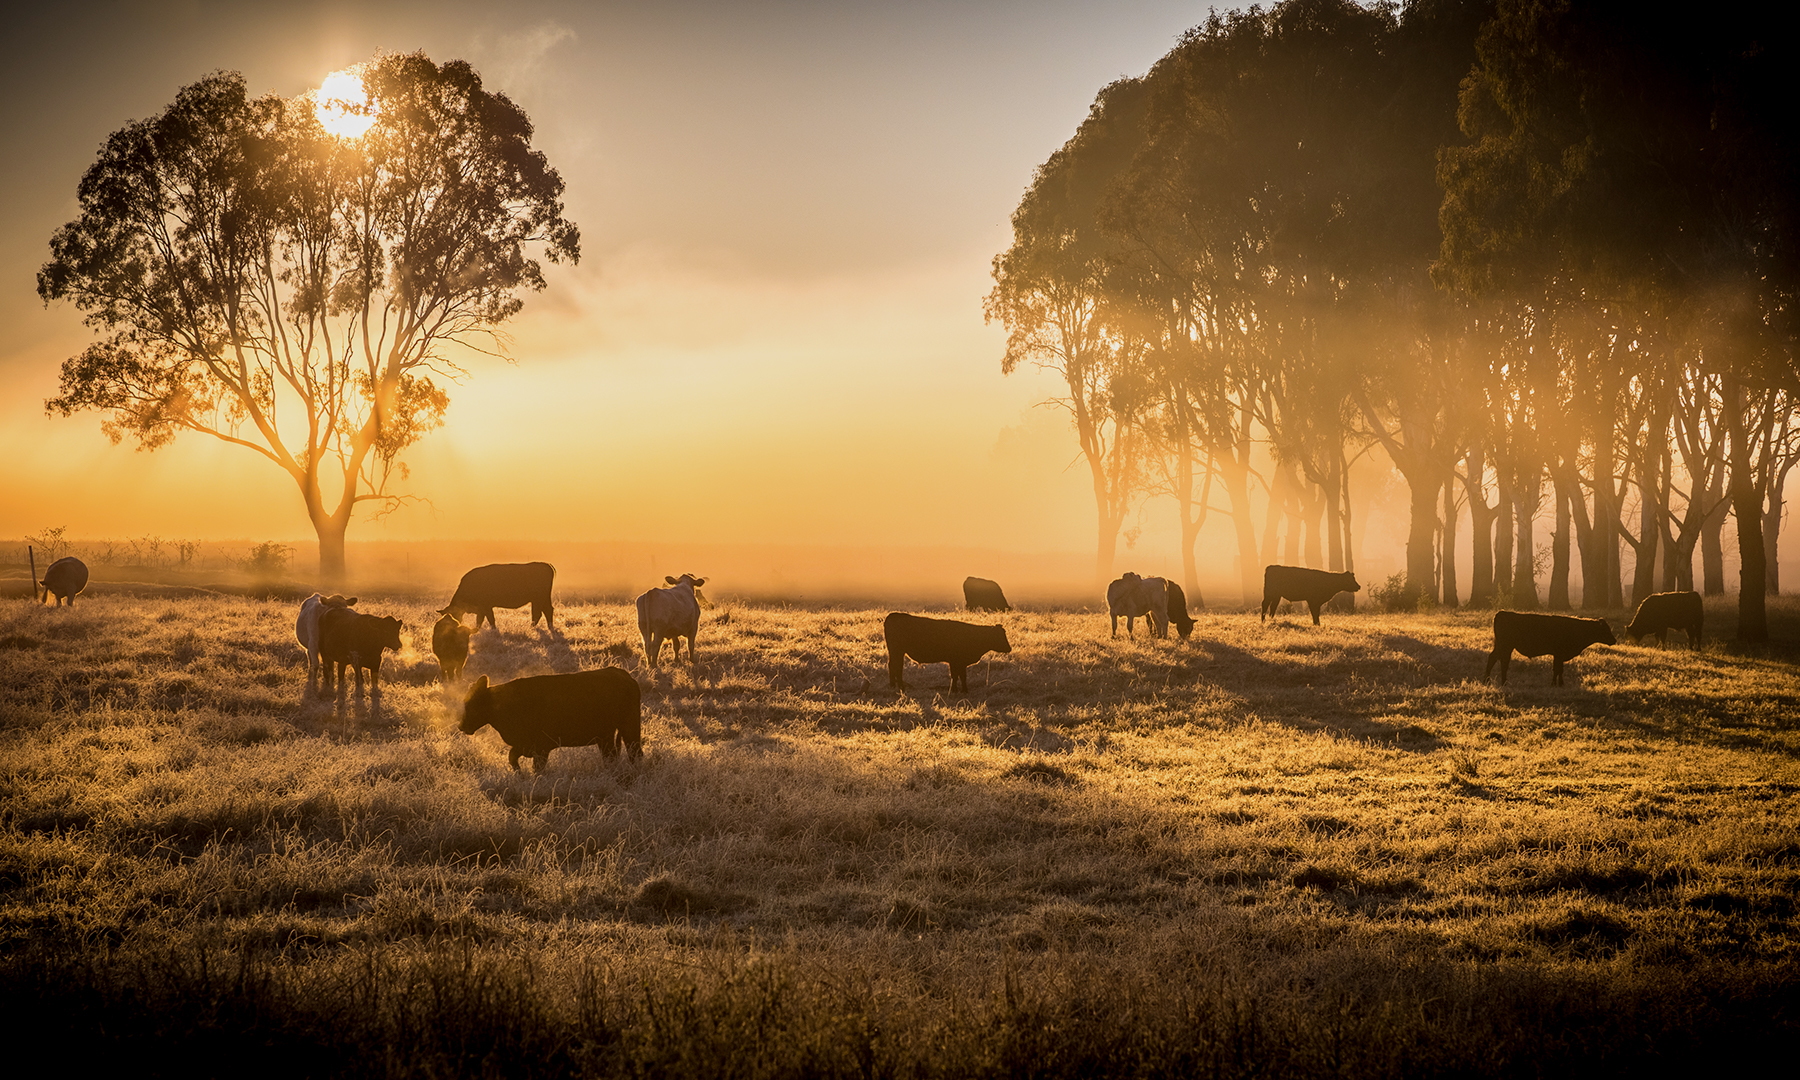 Paddock at sunset with cows grazing